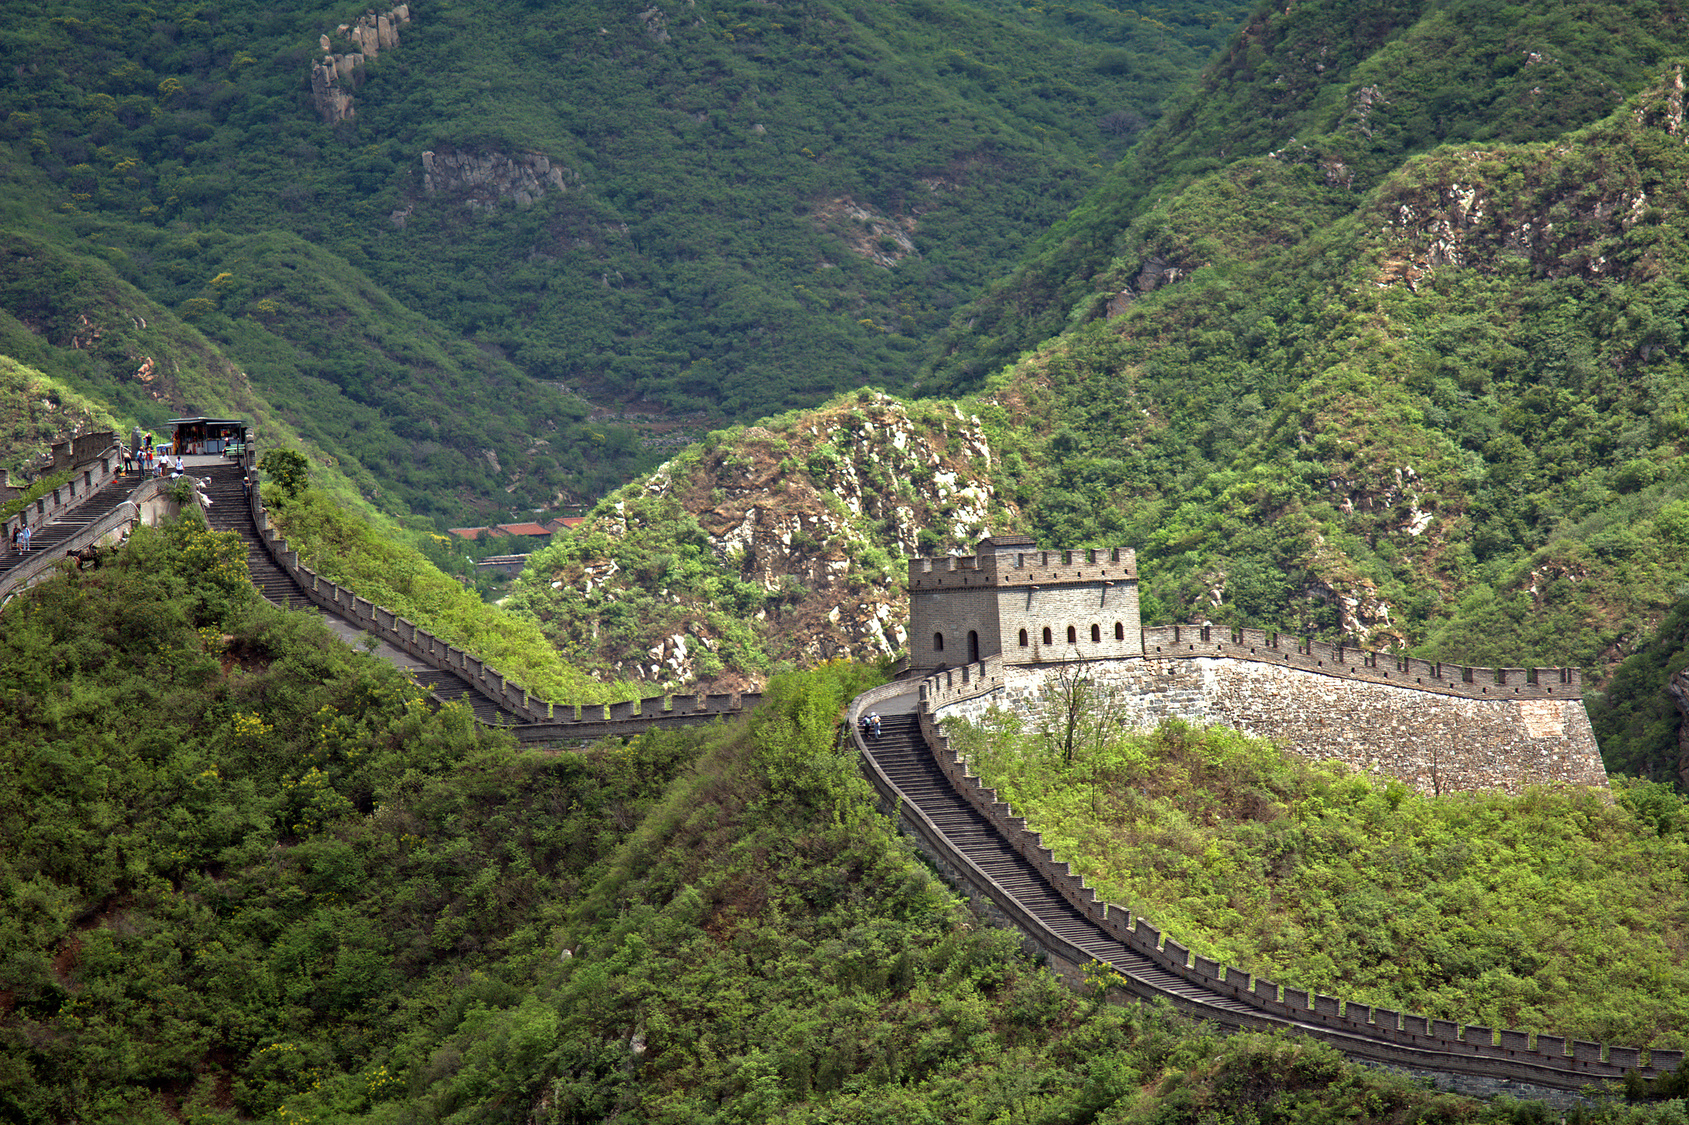 The Great Wall of China was built by the Qin Dynasty. What will the Tyent Dynasty build next?